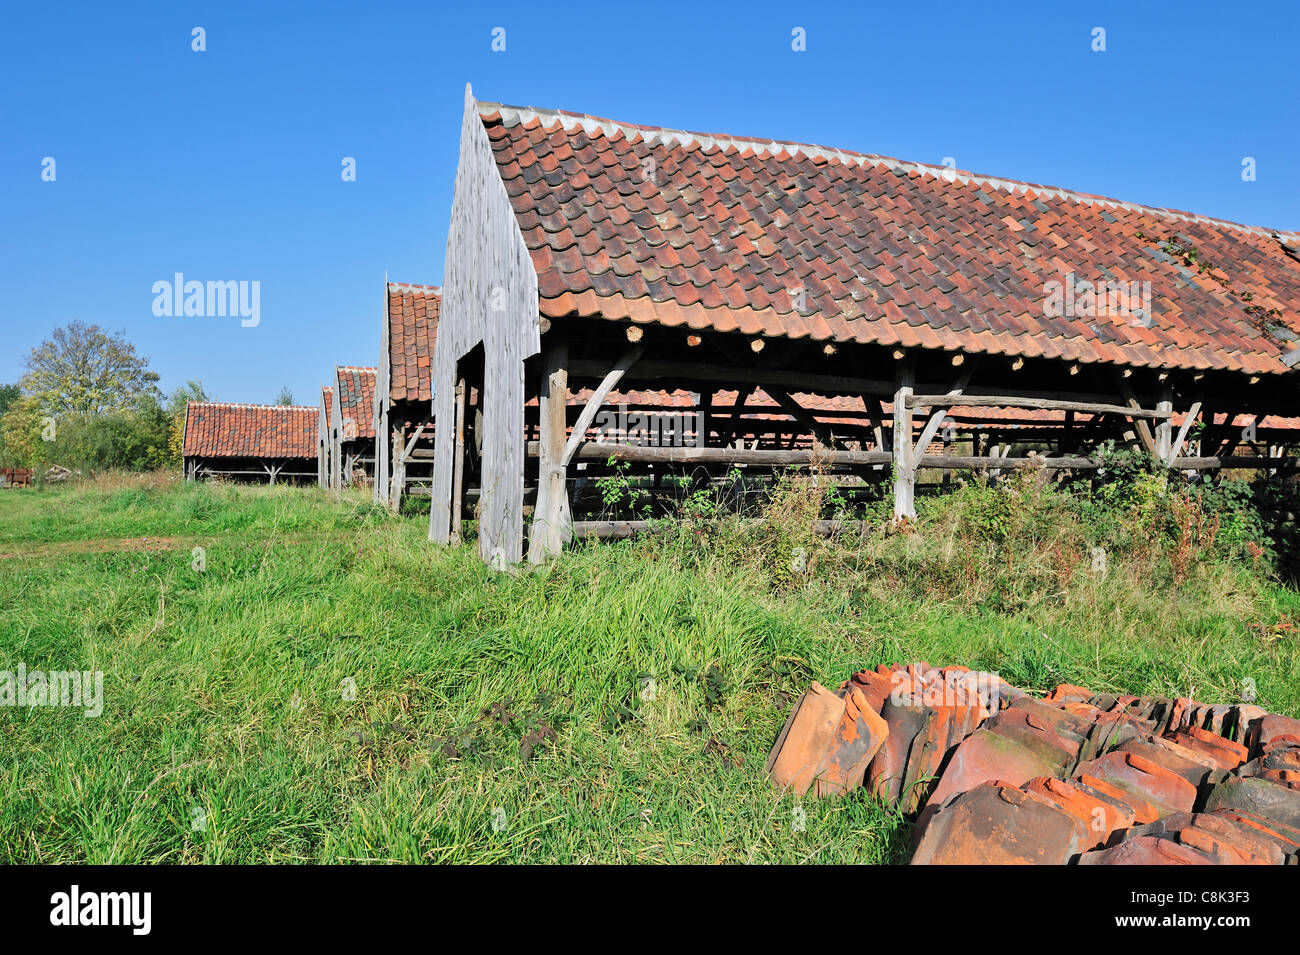 Drying yards and roof tiles at brickworks, Boom, Belgium Stock Photo